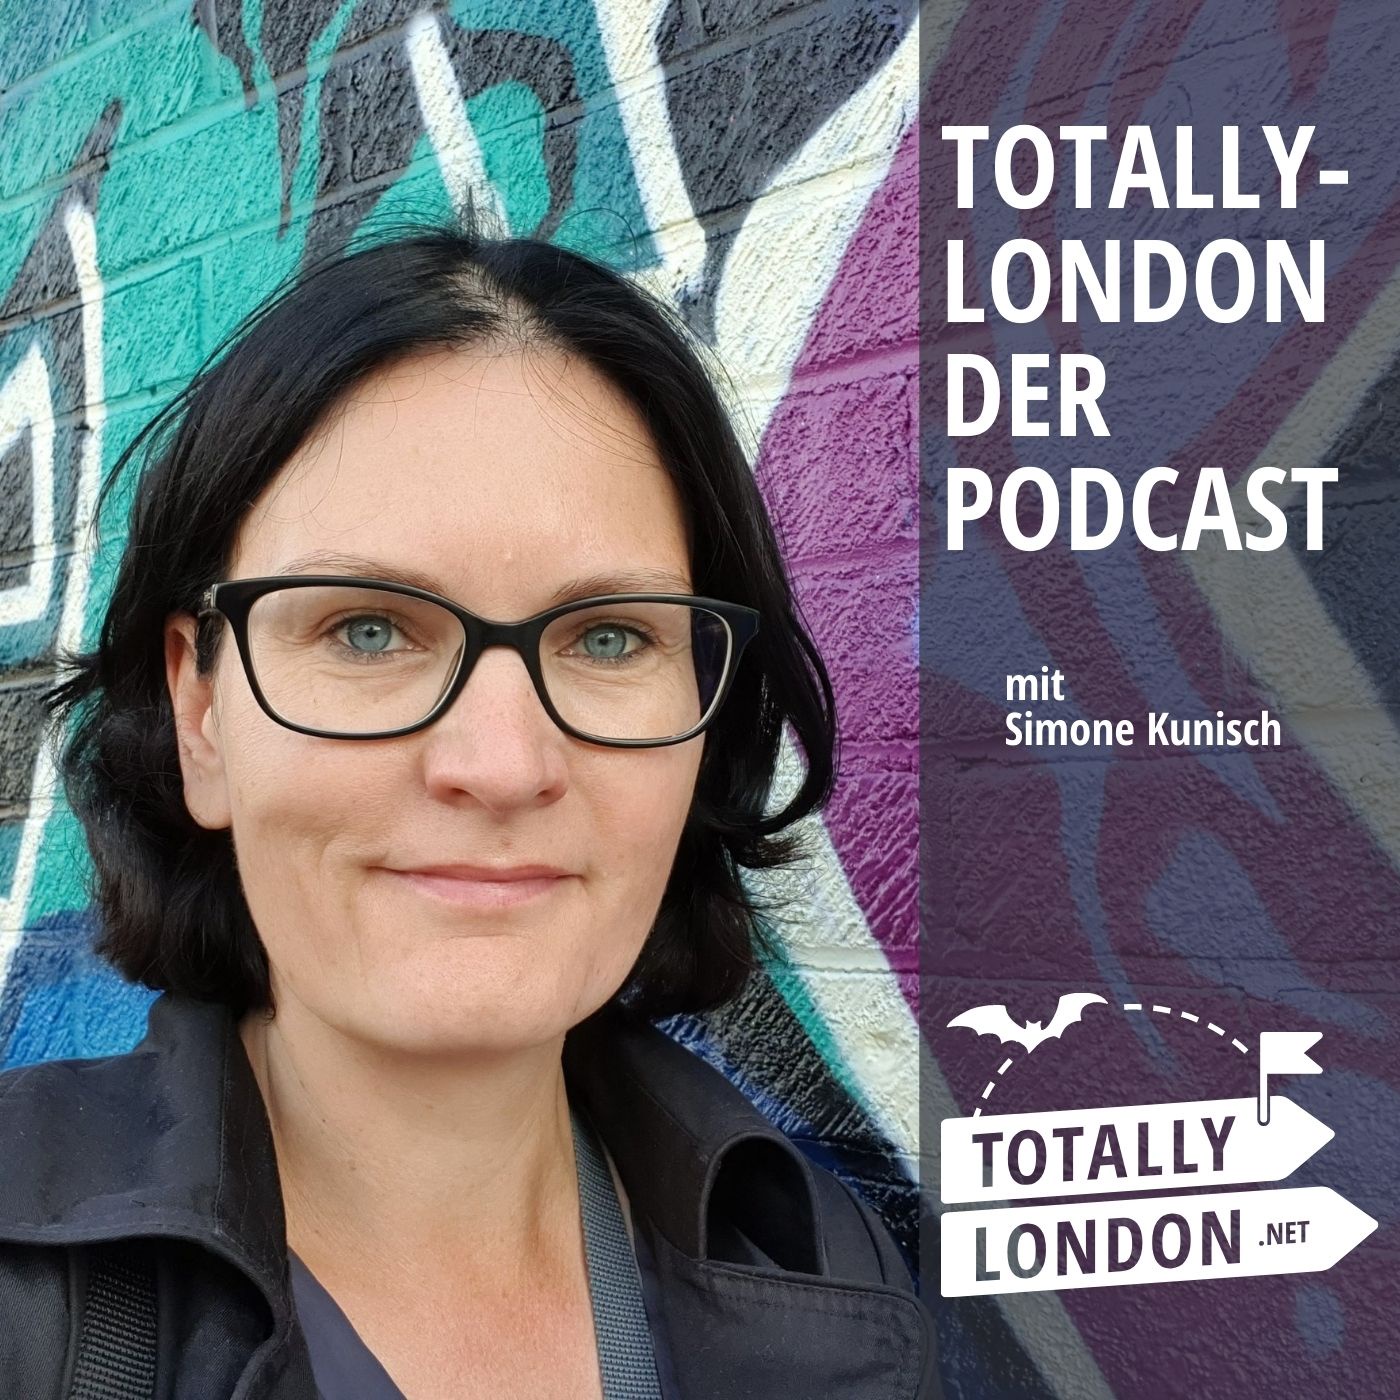 Totally-London der Podcast